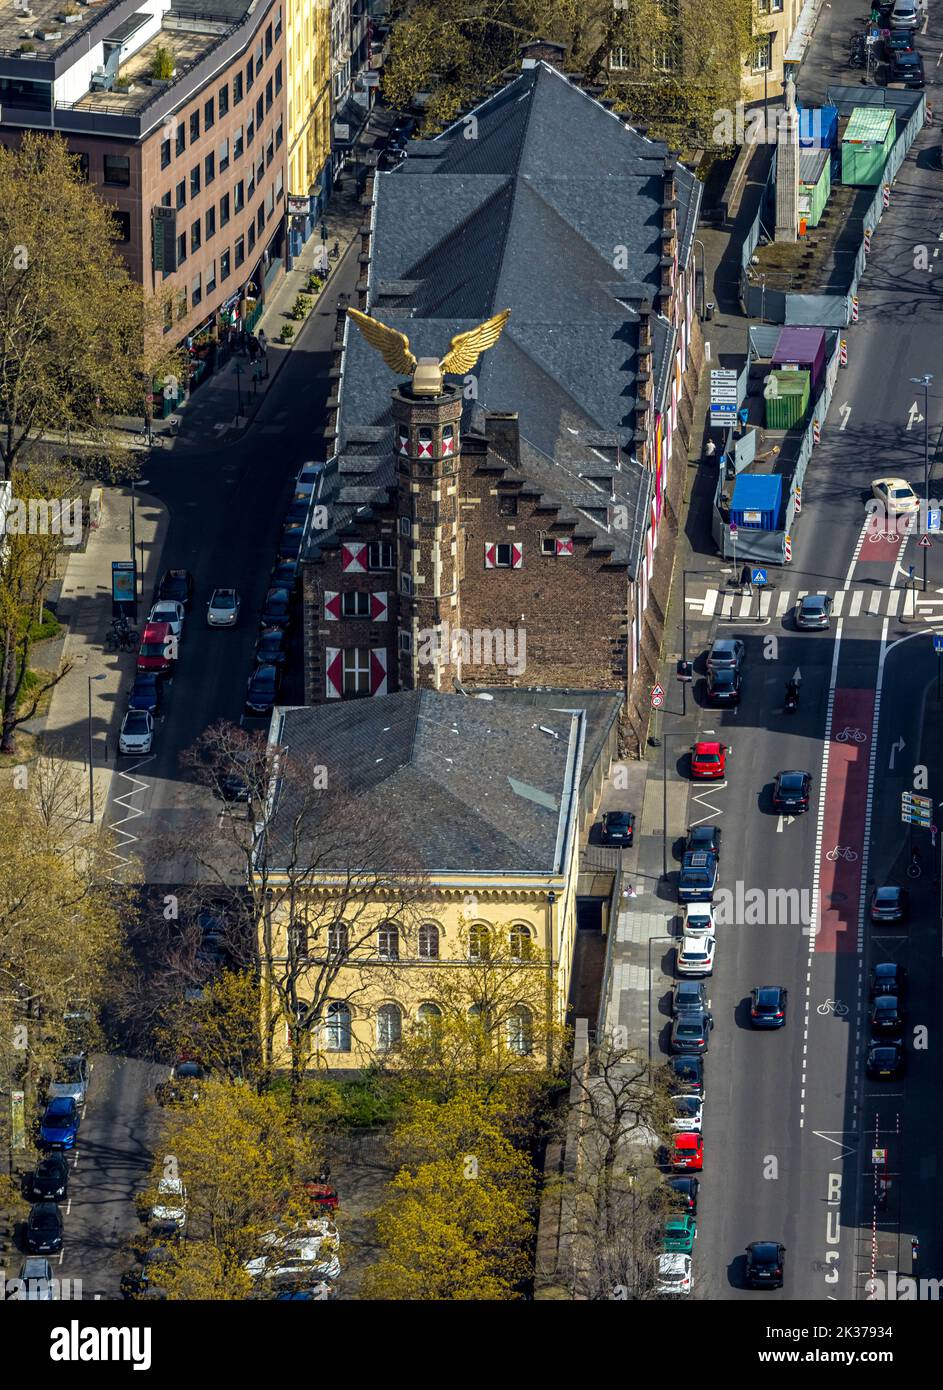 Aerial view, Old Guard Guard Building and Armory, Golden Bird, The Golden Bird, Winged Car, Cologne City Museum Building Complex, Zeughausstraße, Old Stock Photo